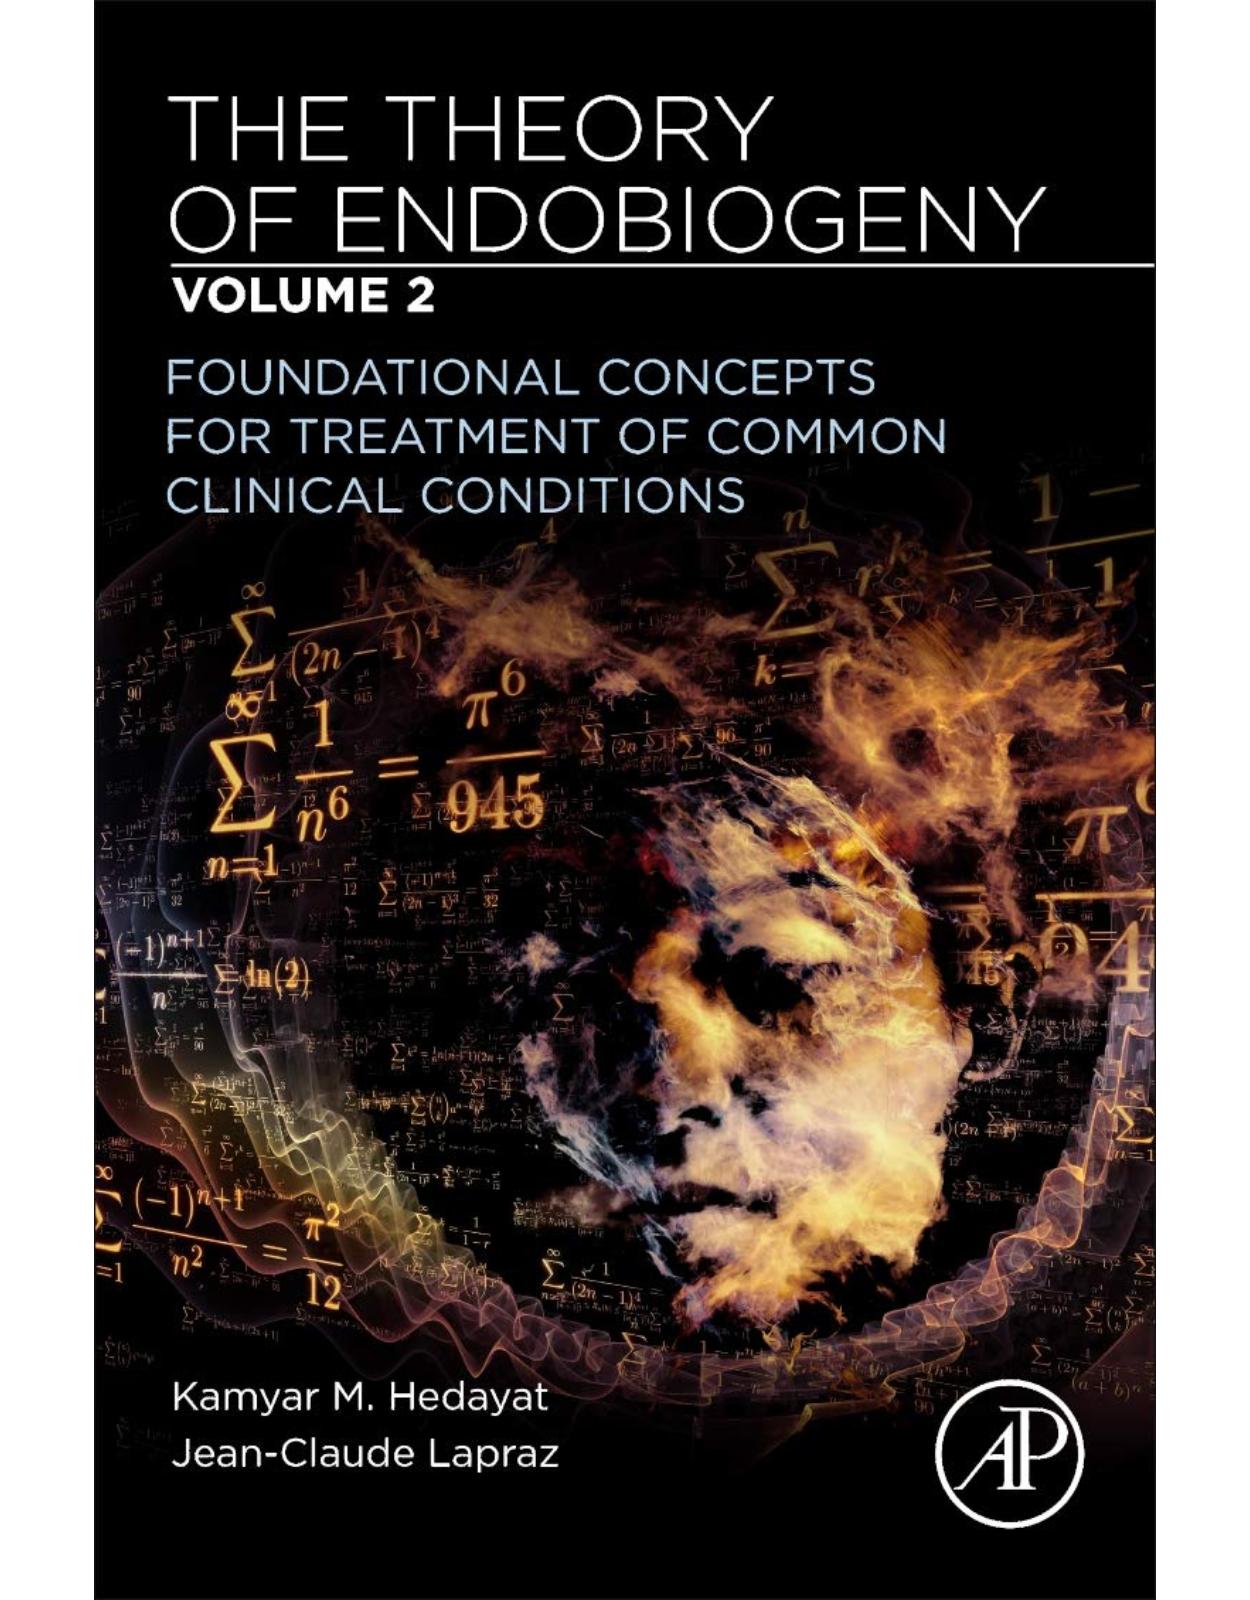 The Theory of Endobiogeny: Volume 2: Foundational Concepts for Treatment of Common Clinical Conditions